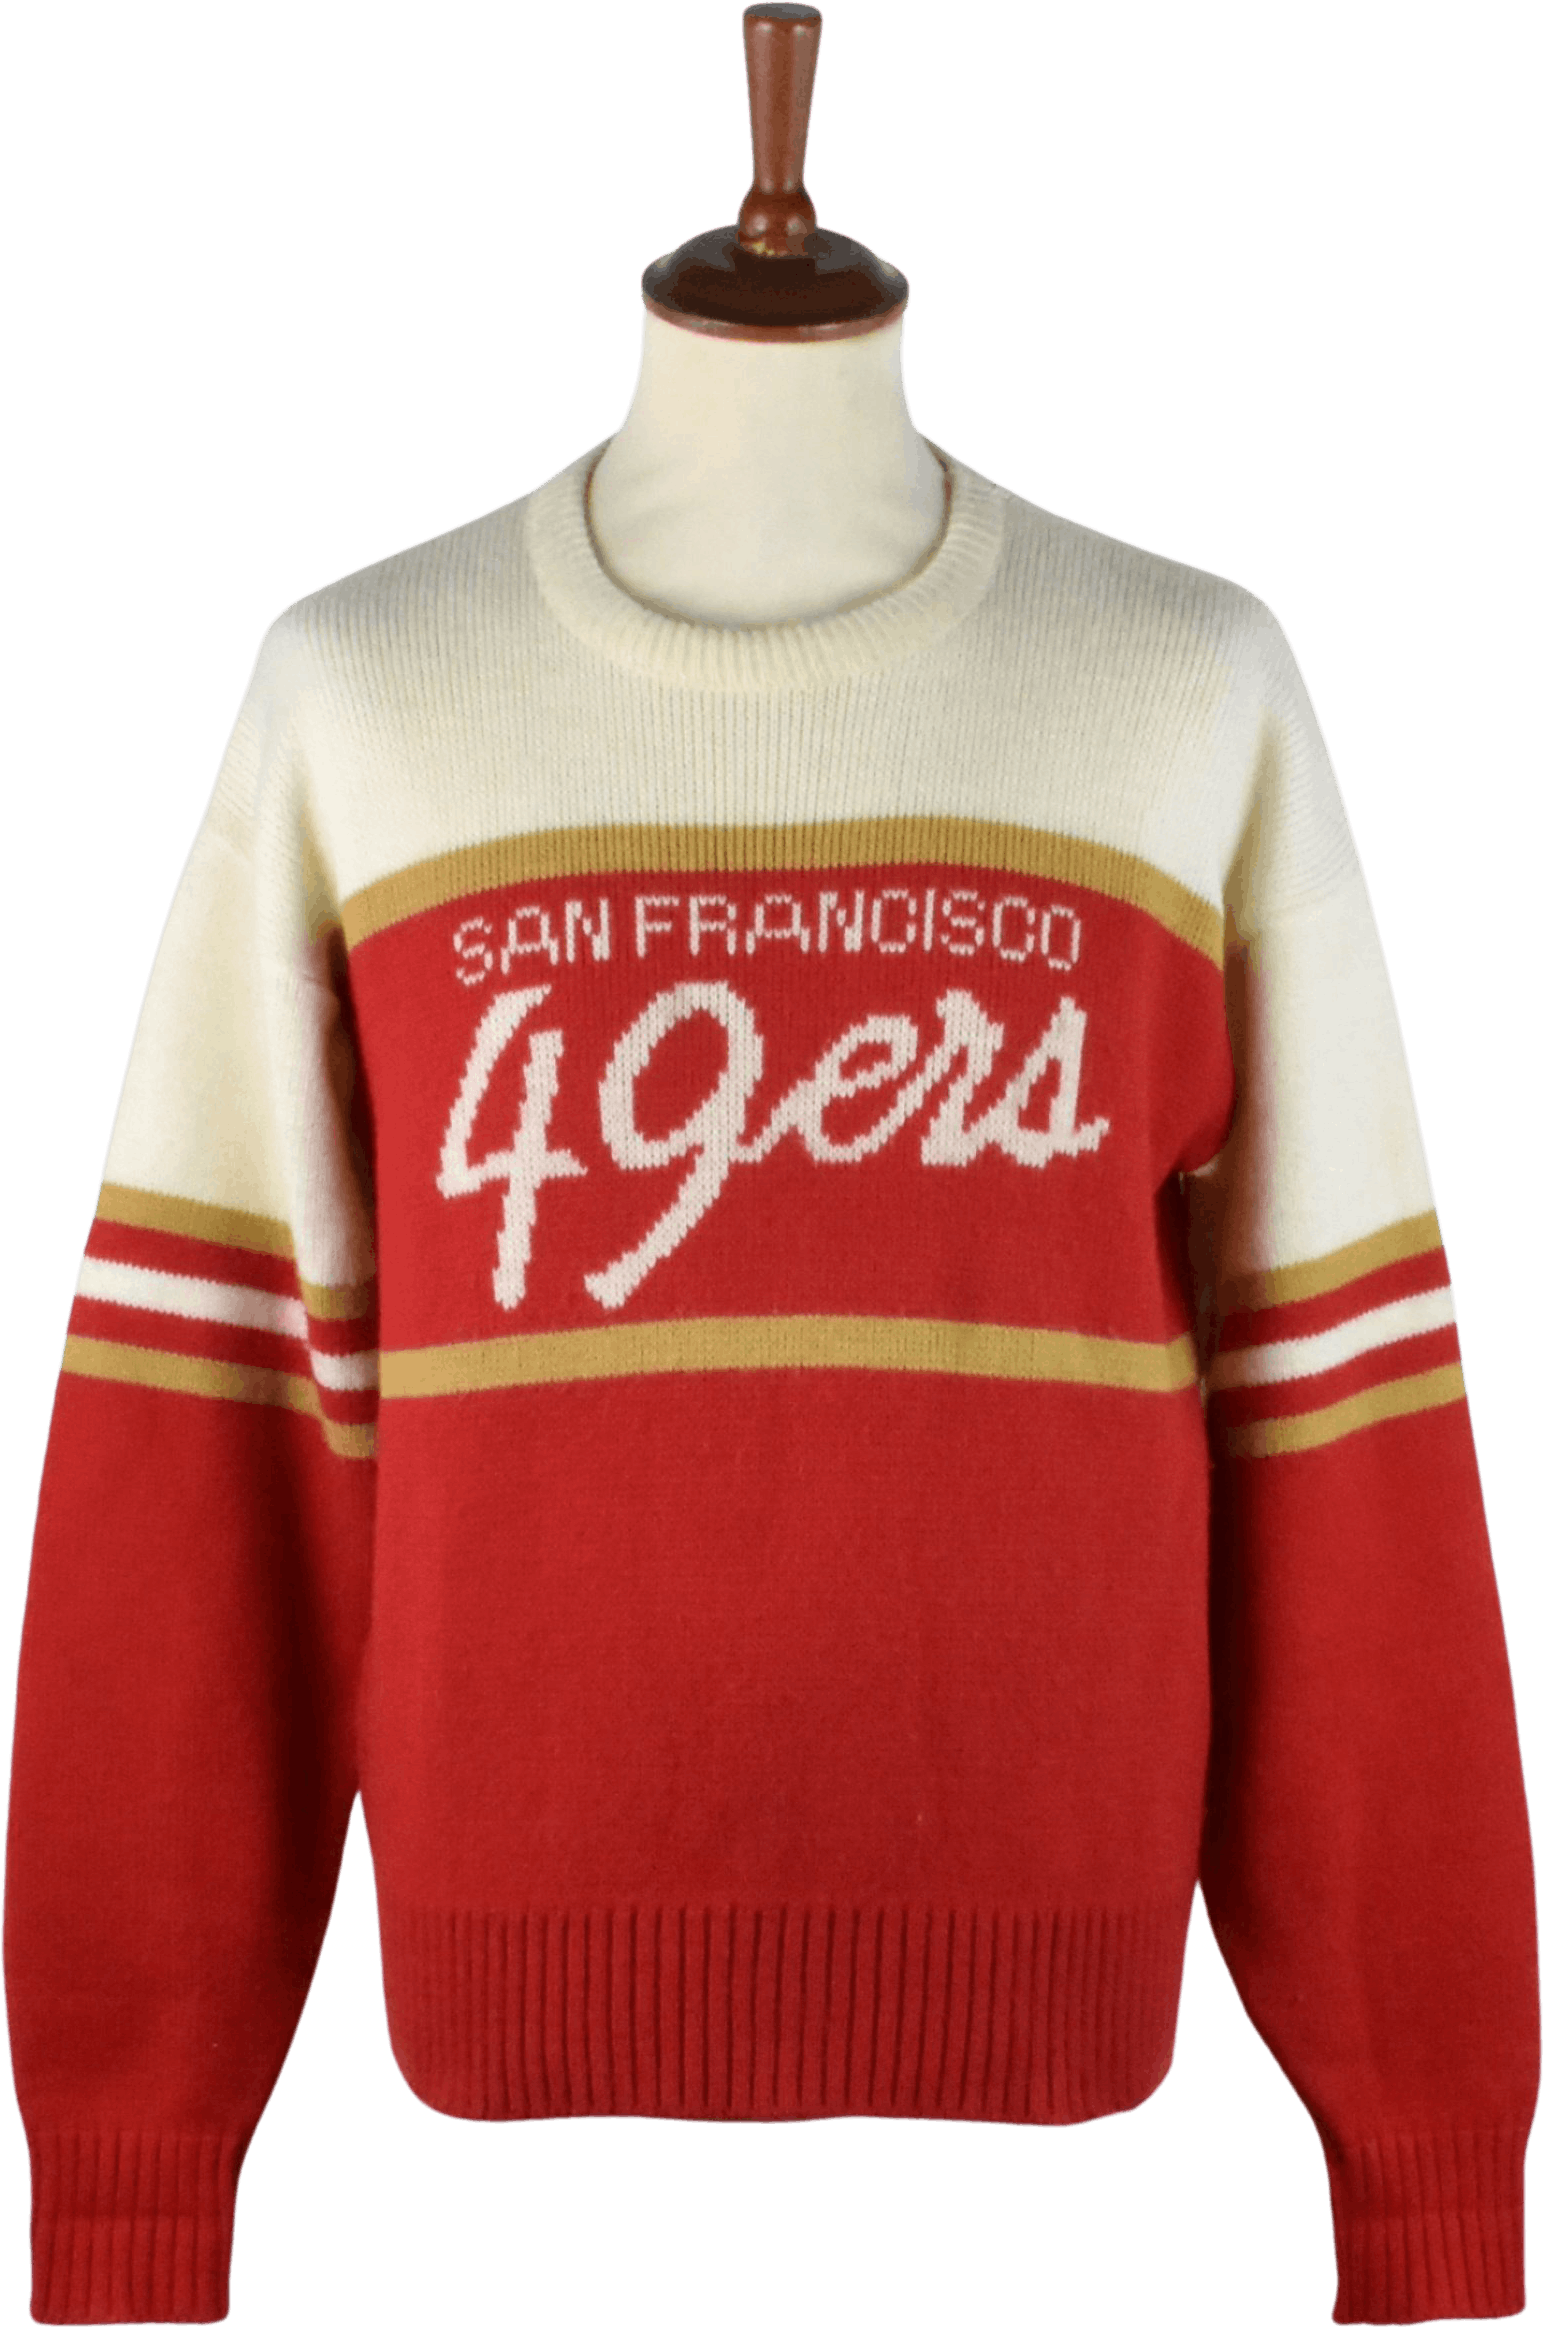 cliff engle 49ers sweater